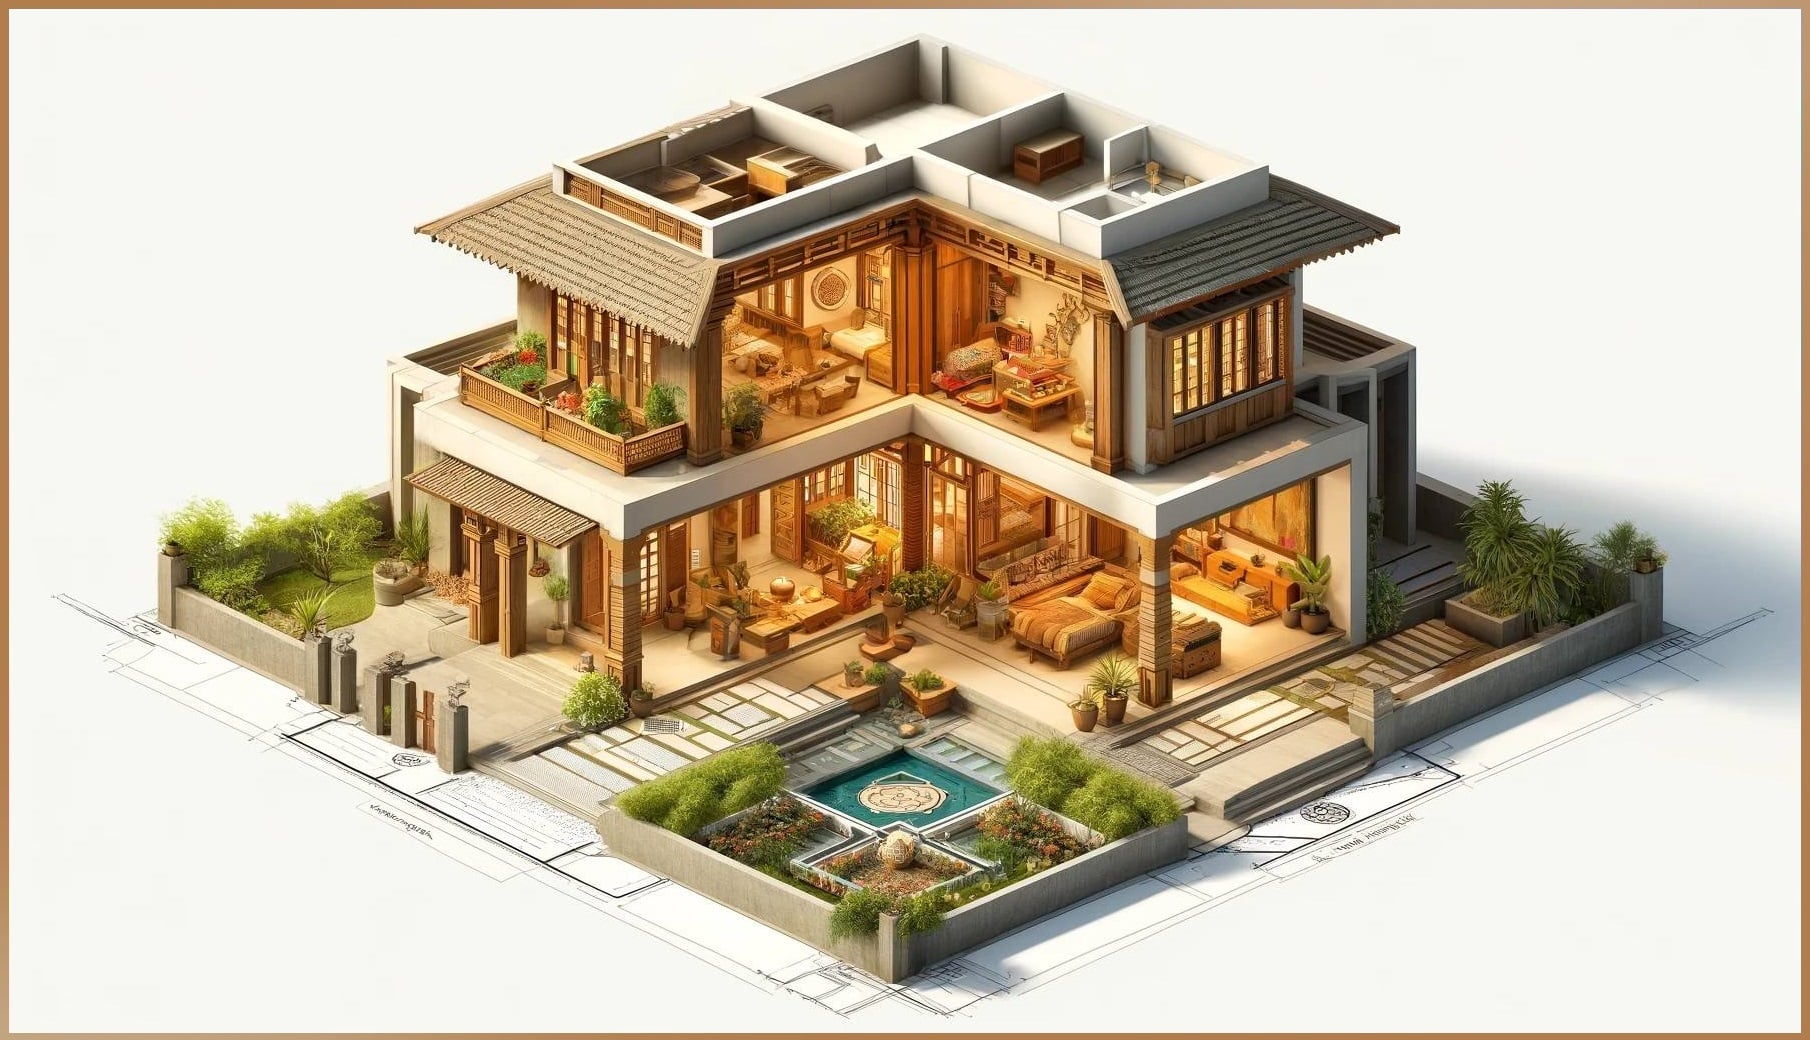 Traditional Indian home plan adhering to Vastu Shastra principles, integrating natural elements into a serene and balanced living space.